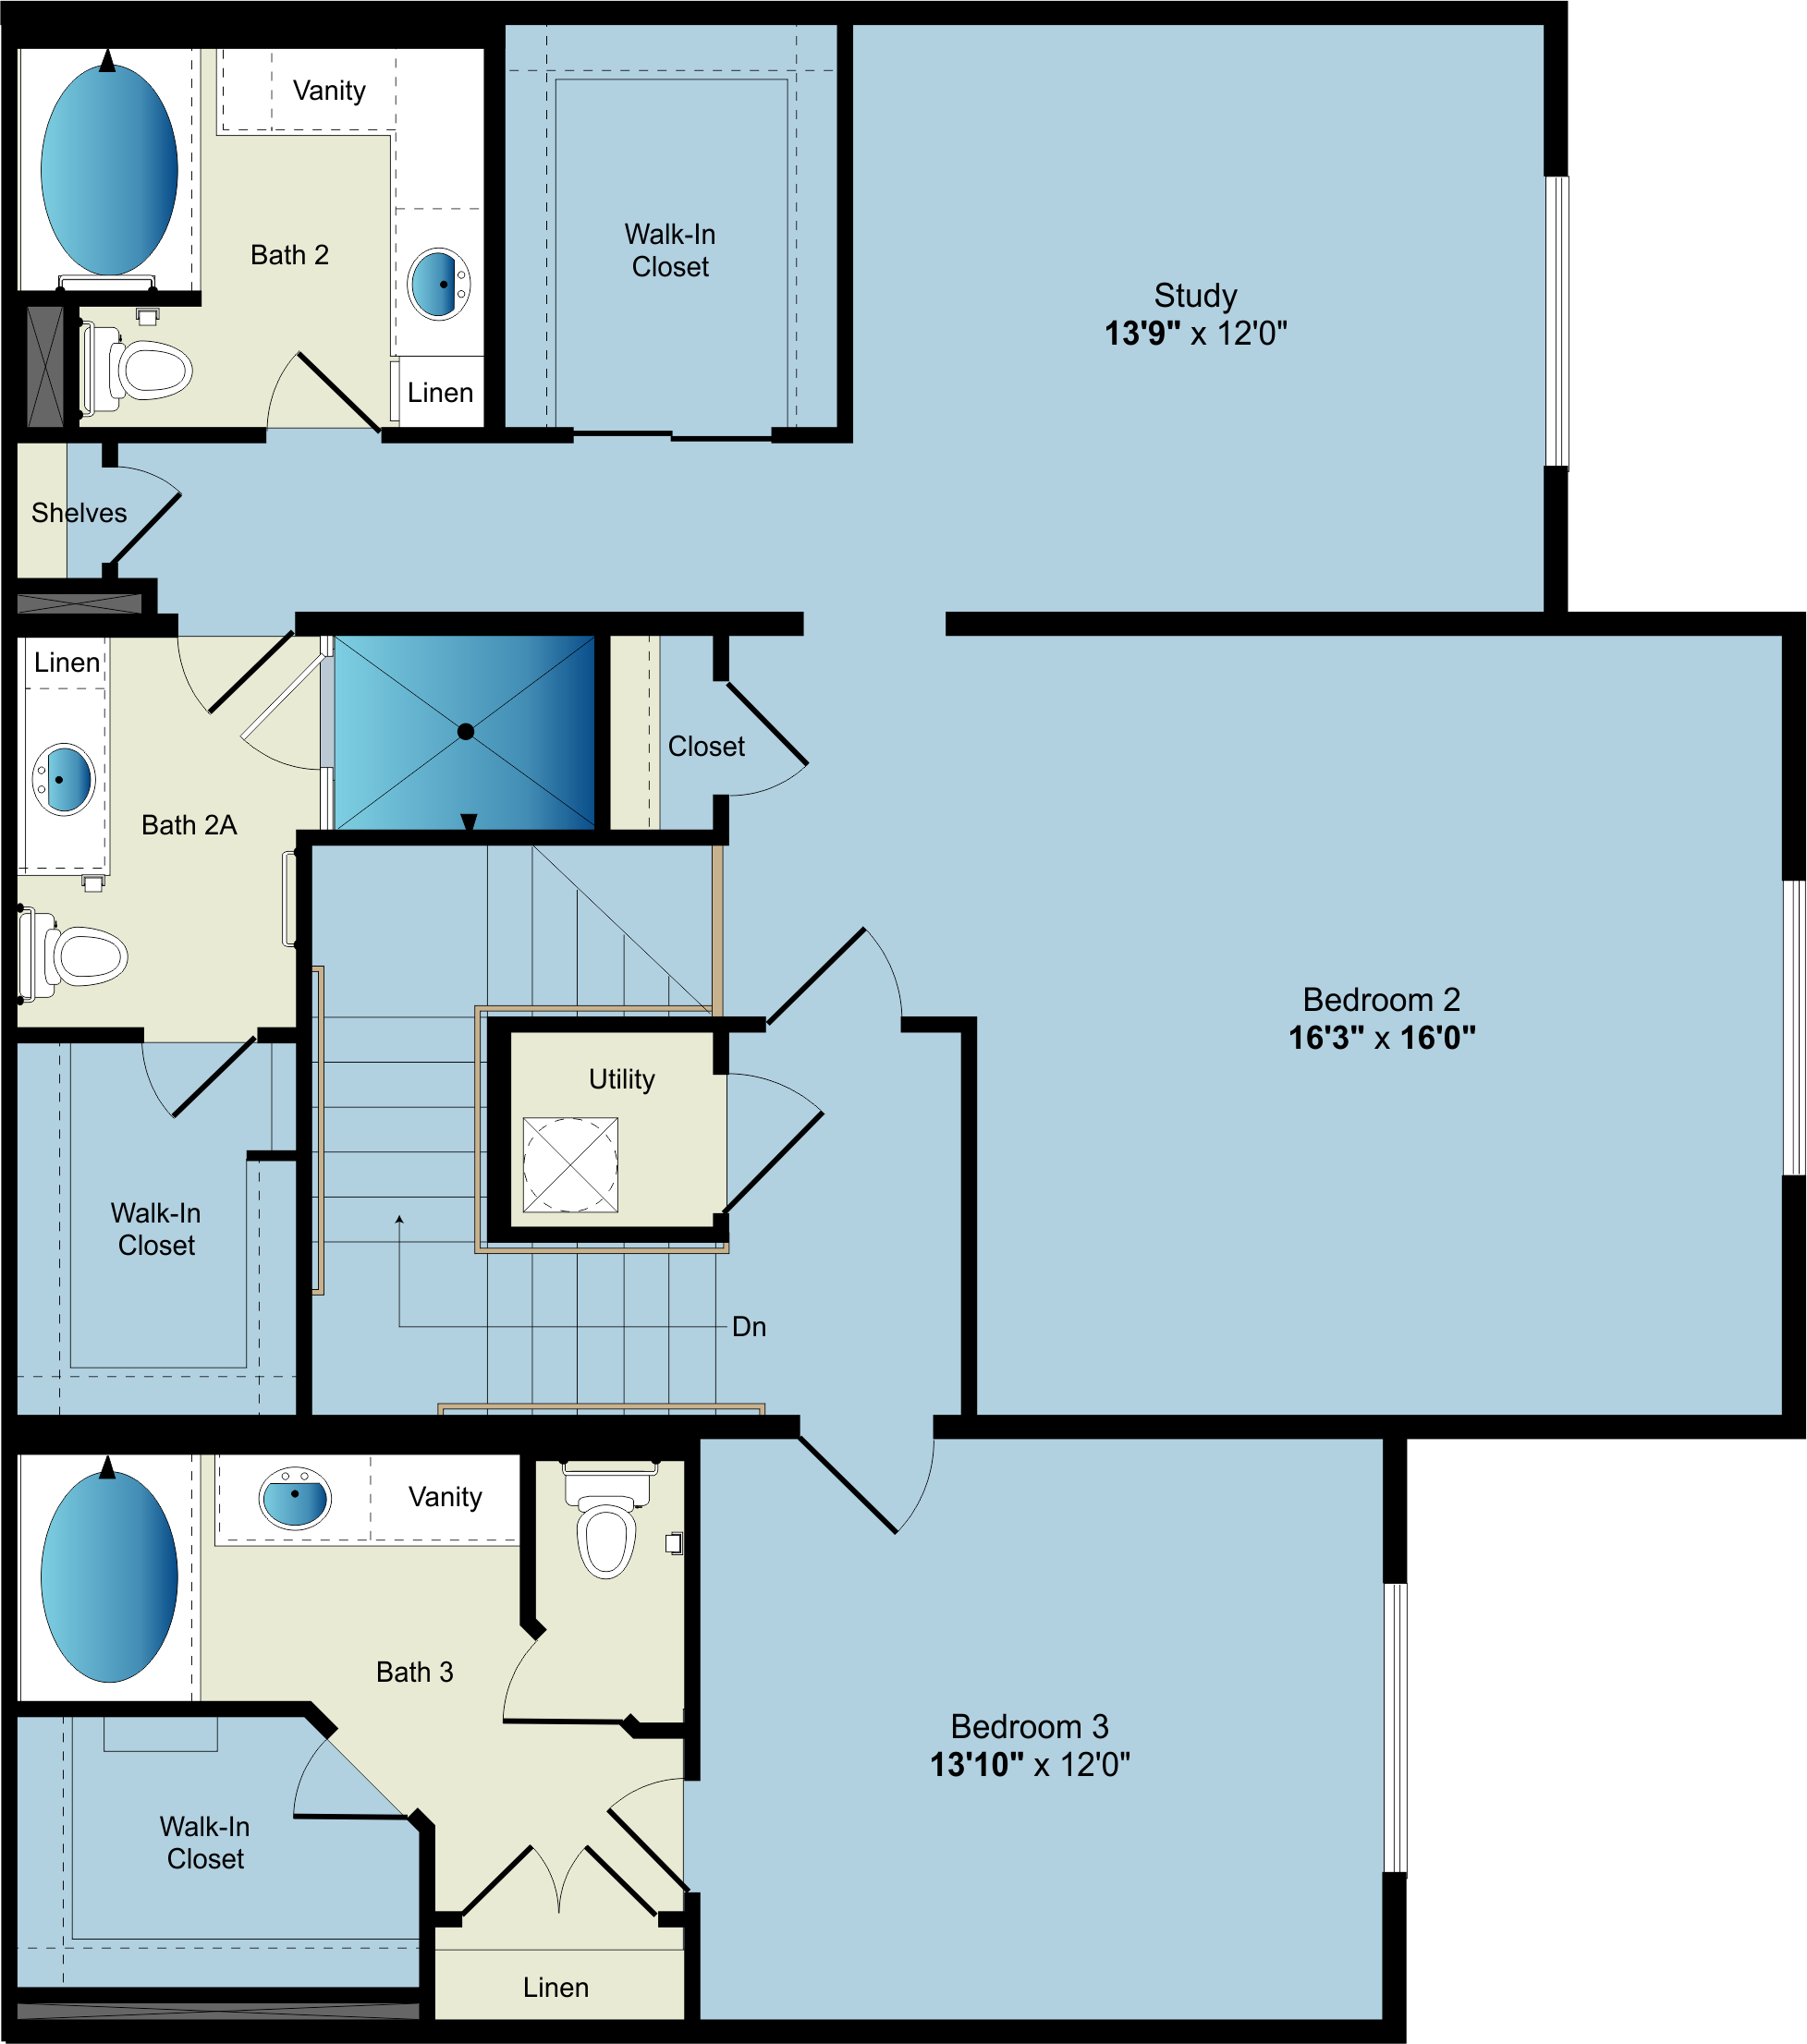 Apartment Rentals Description: A floor plan of an apartment with two bedrooms and two bathrooms available for rent.